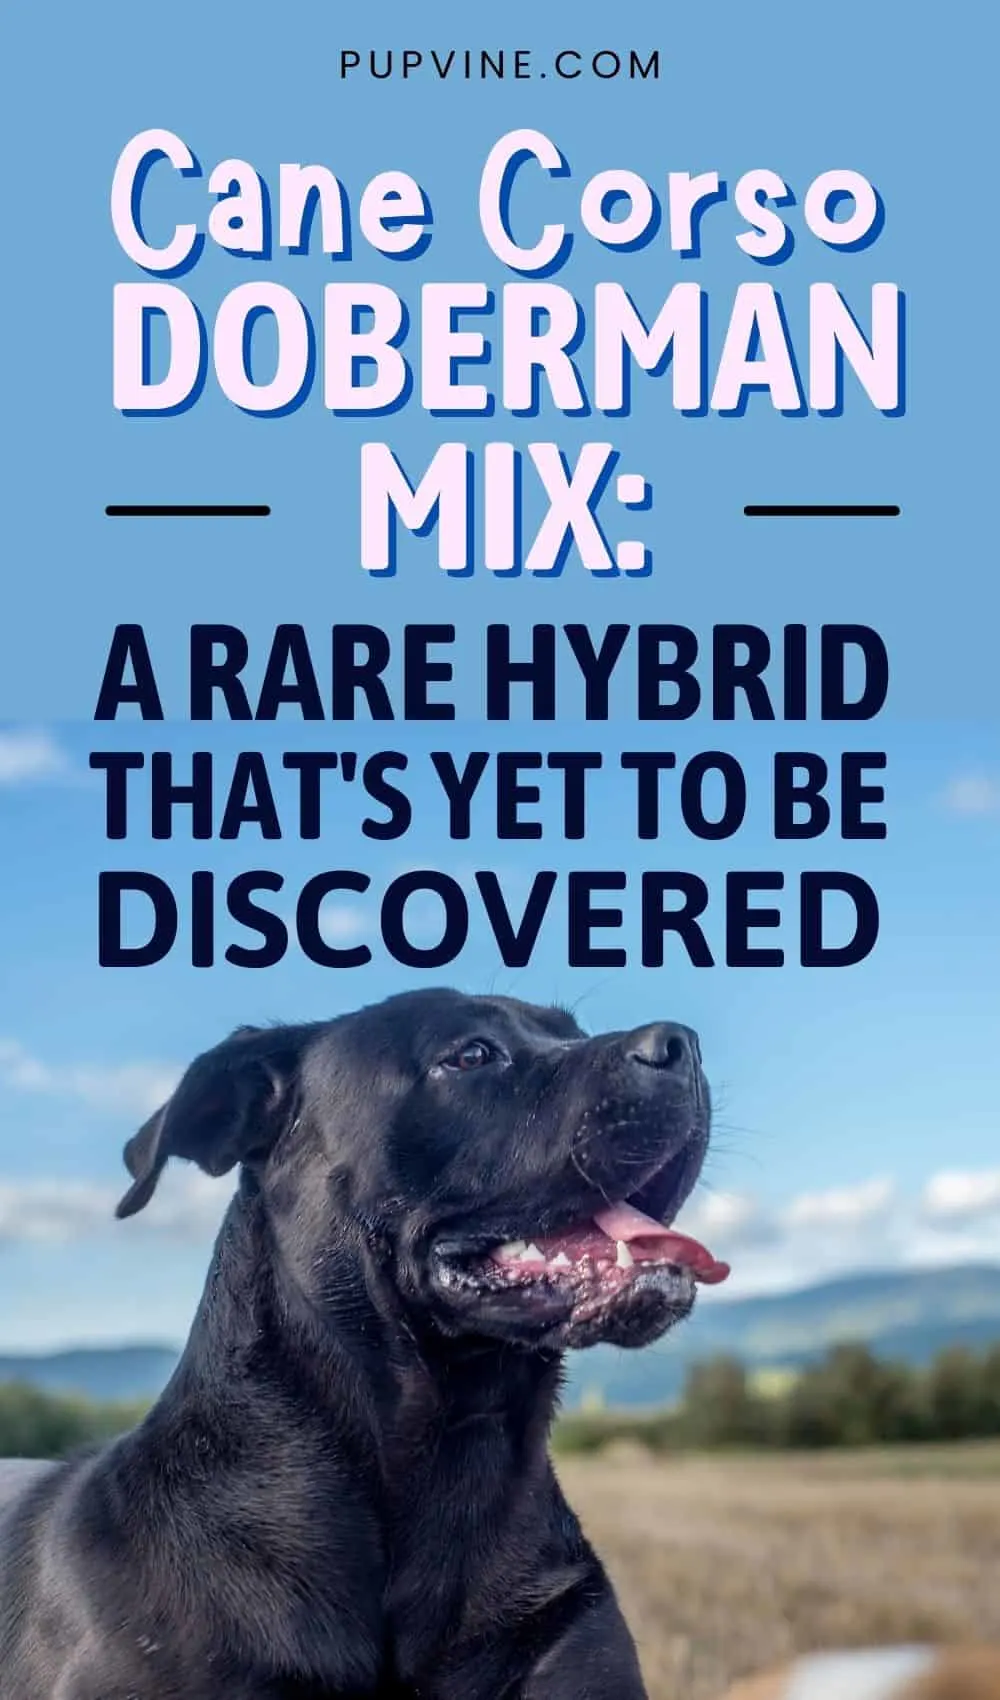 Cane Corso Doberman Mix A Rare Hybrid That's Yet To Be Discovered